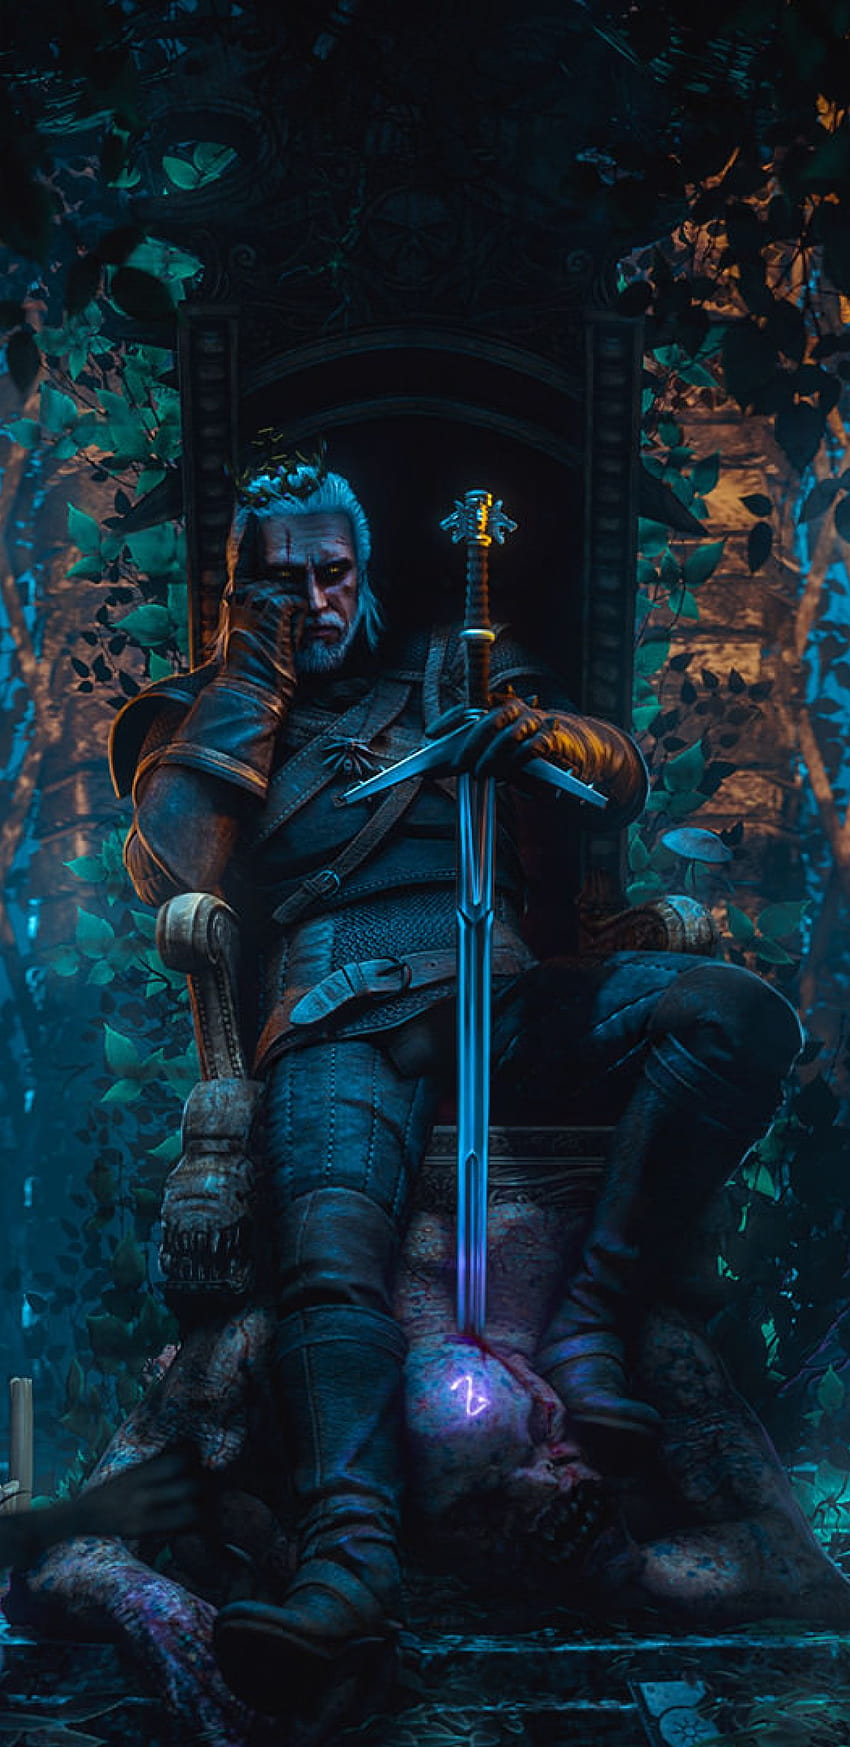 1440x2960 ​​Geralt Of Rivia The Witcher 3 Samsung Galaxy Note 9,8, S9,S8,S Q, Game, dan Latar Belakang, android sang penyihir wallpaper ponsel HD